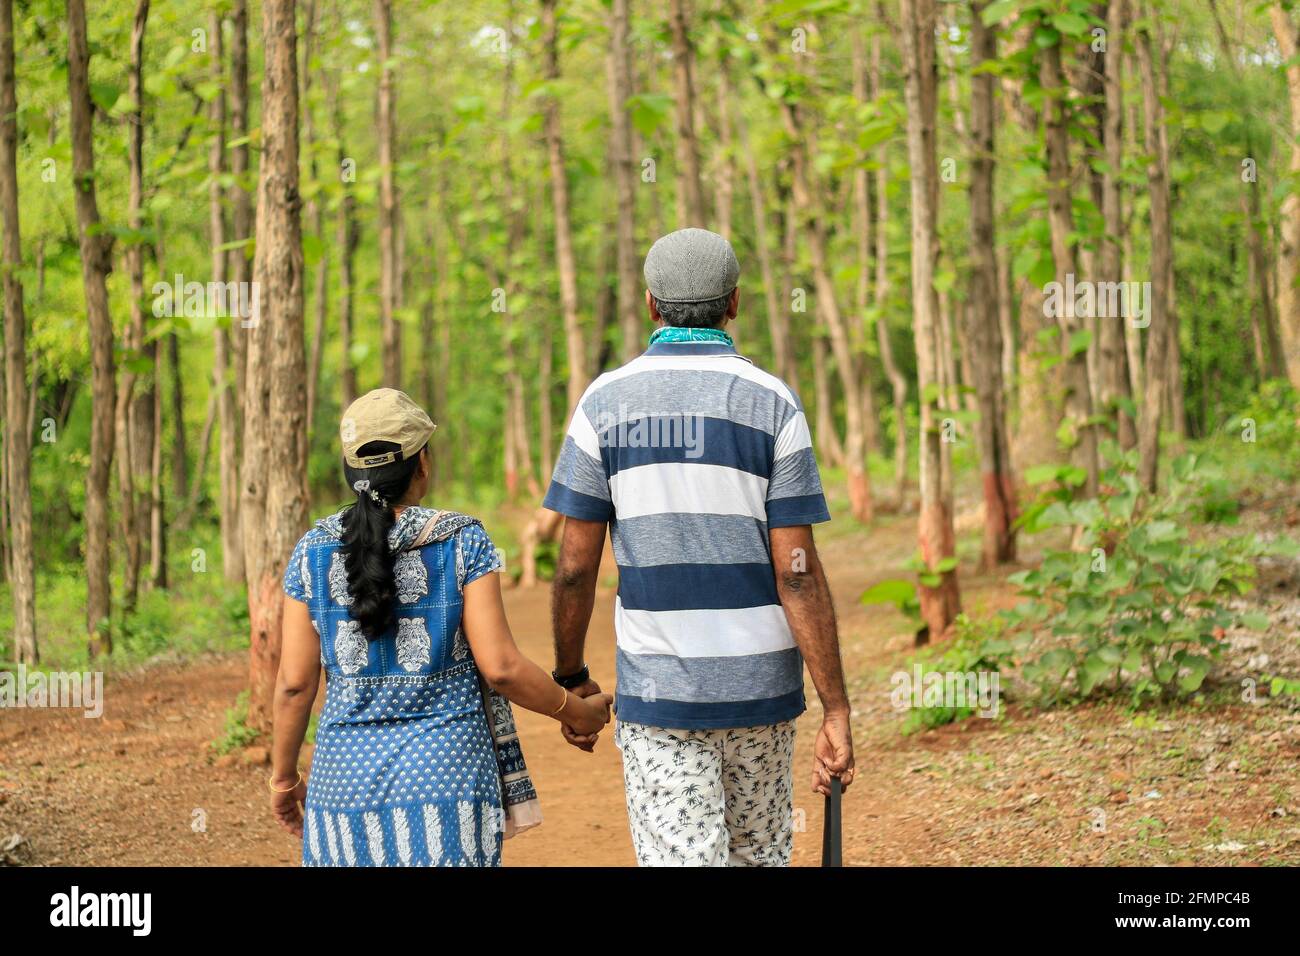 Backside view of a middle aged couple (40-45 yrs) walking hand in hand in a green dense forest wearing caps Stock Photo